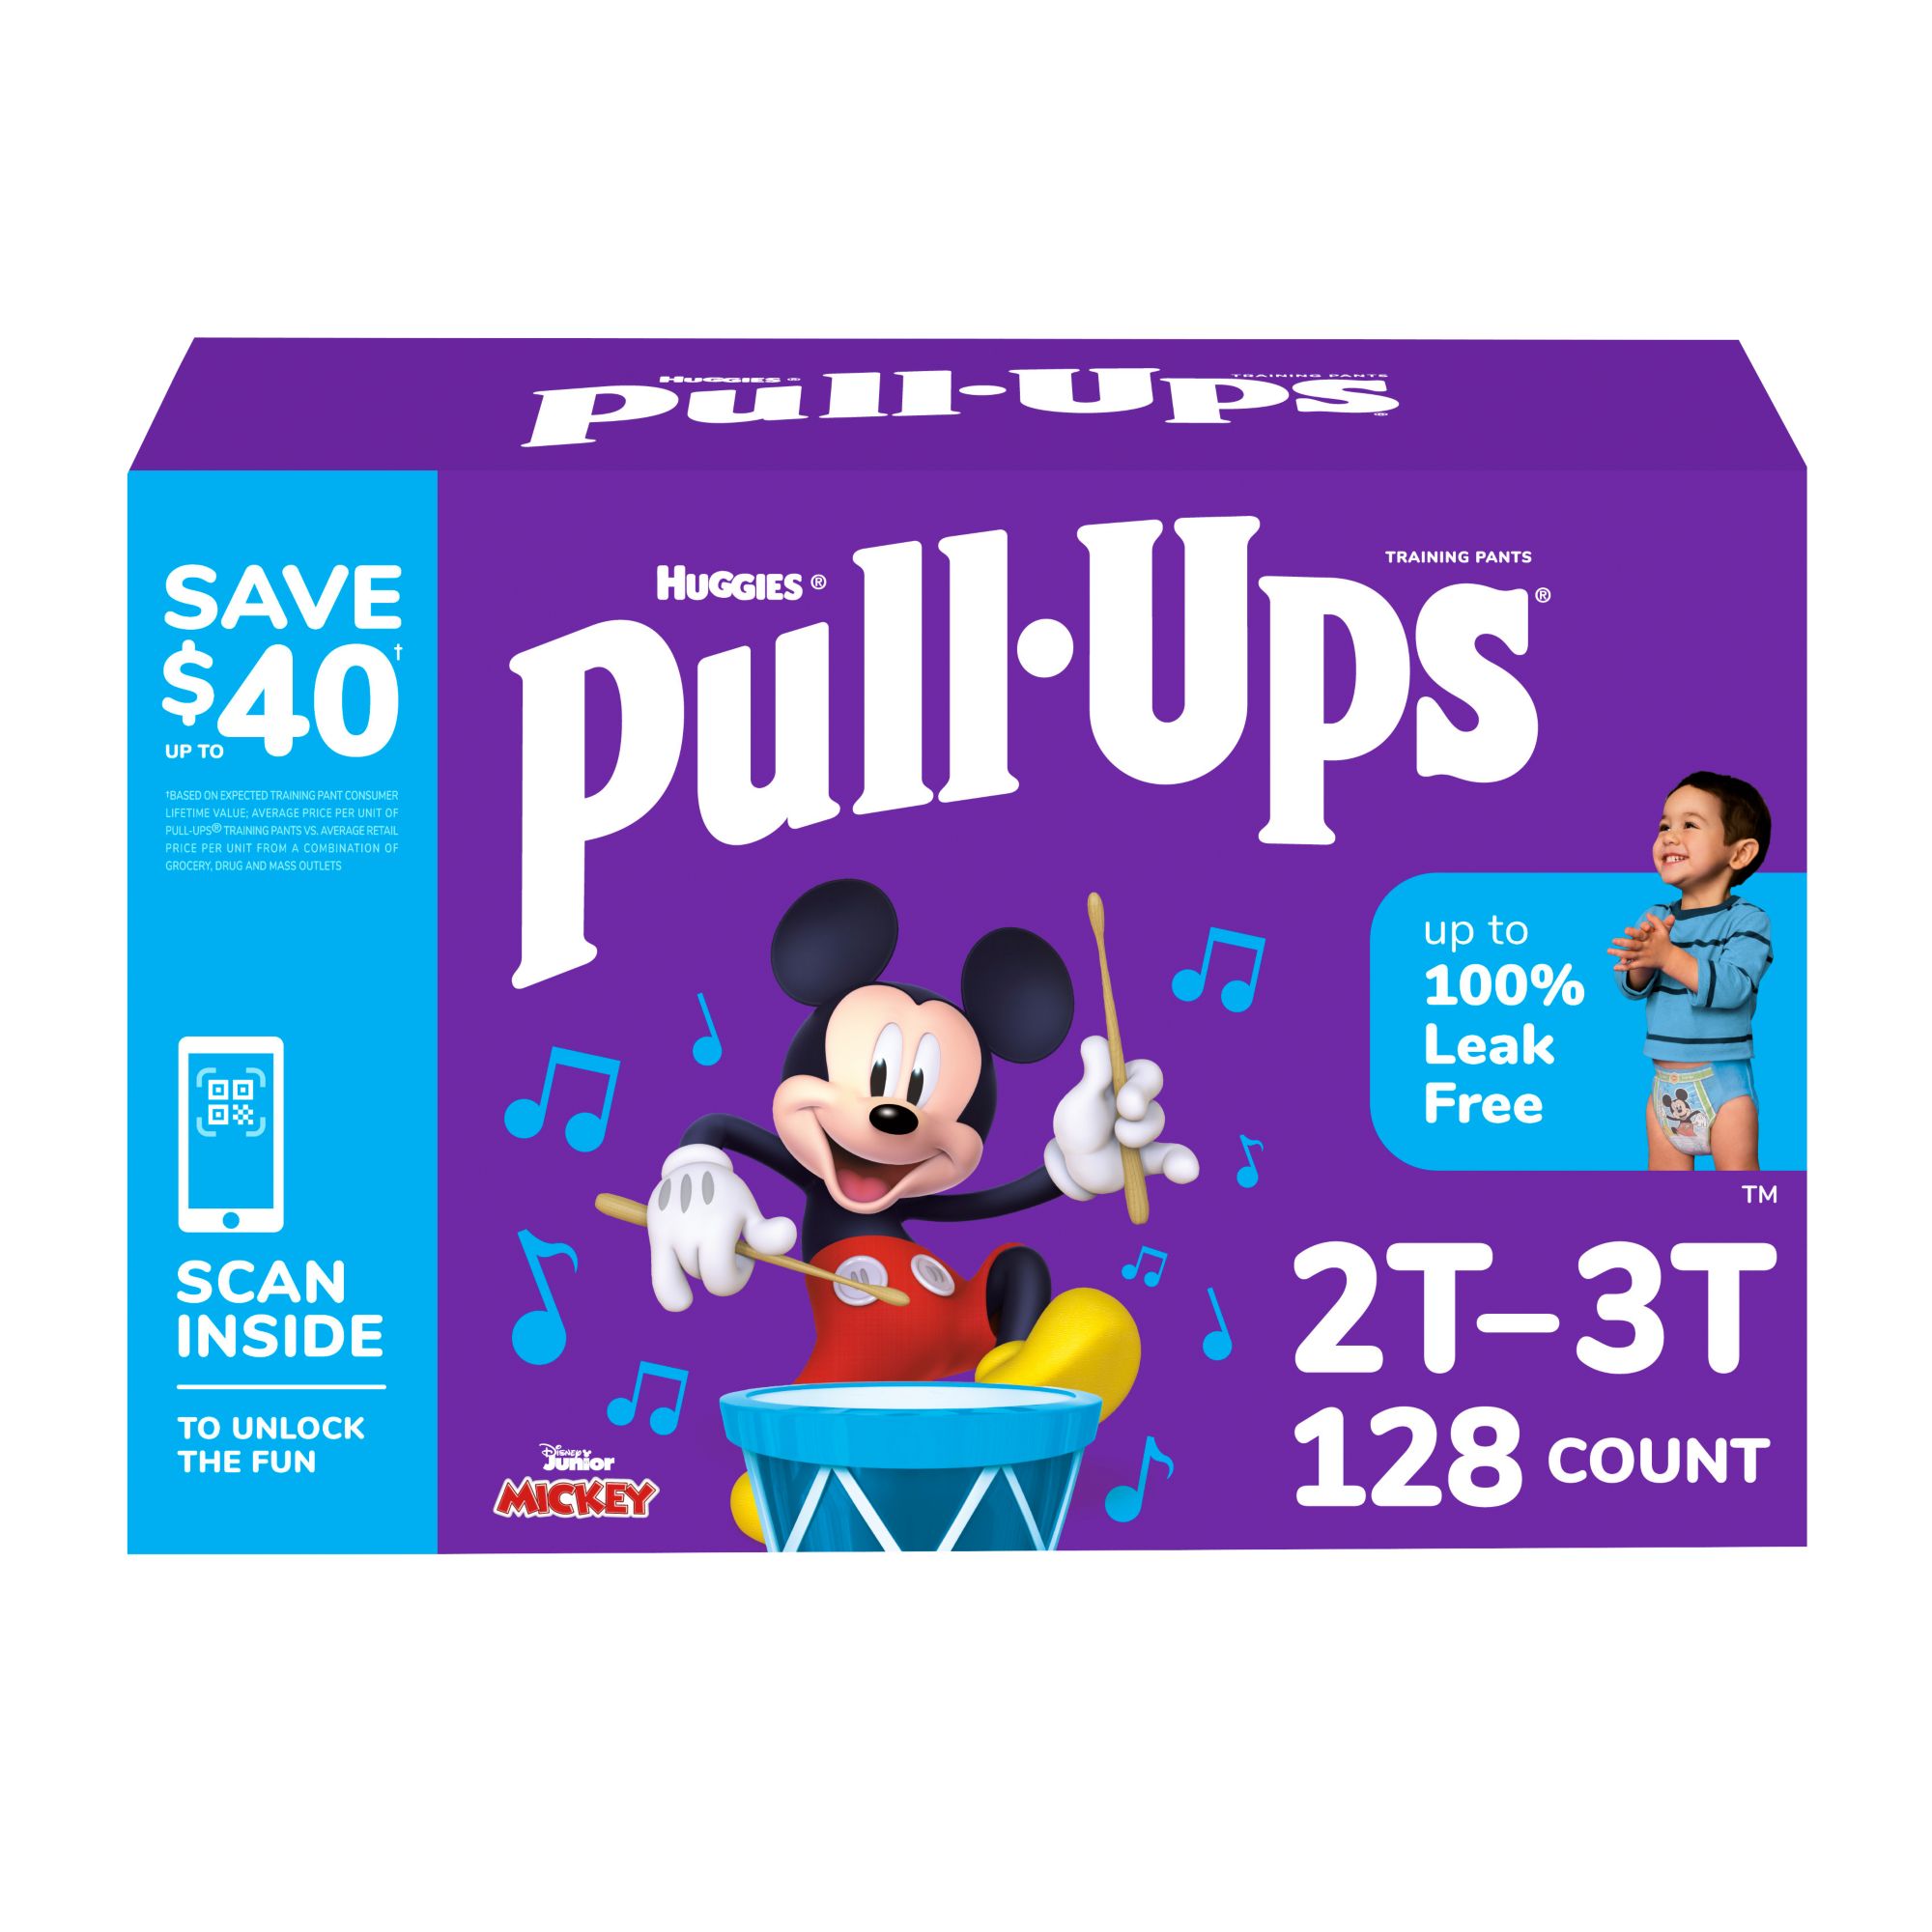 NEW Huggies Pull-Ups Training Pants Girls - 2T-3T - 25 Count TOY